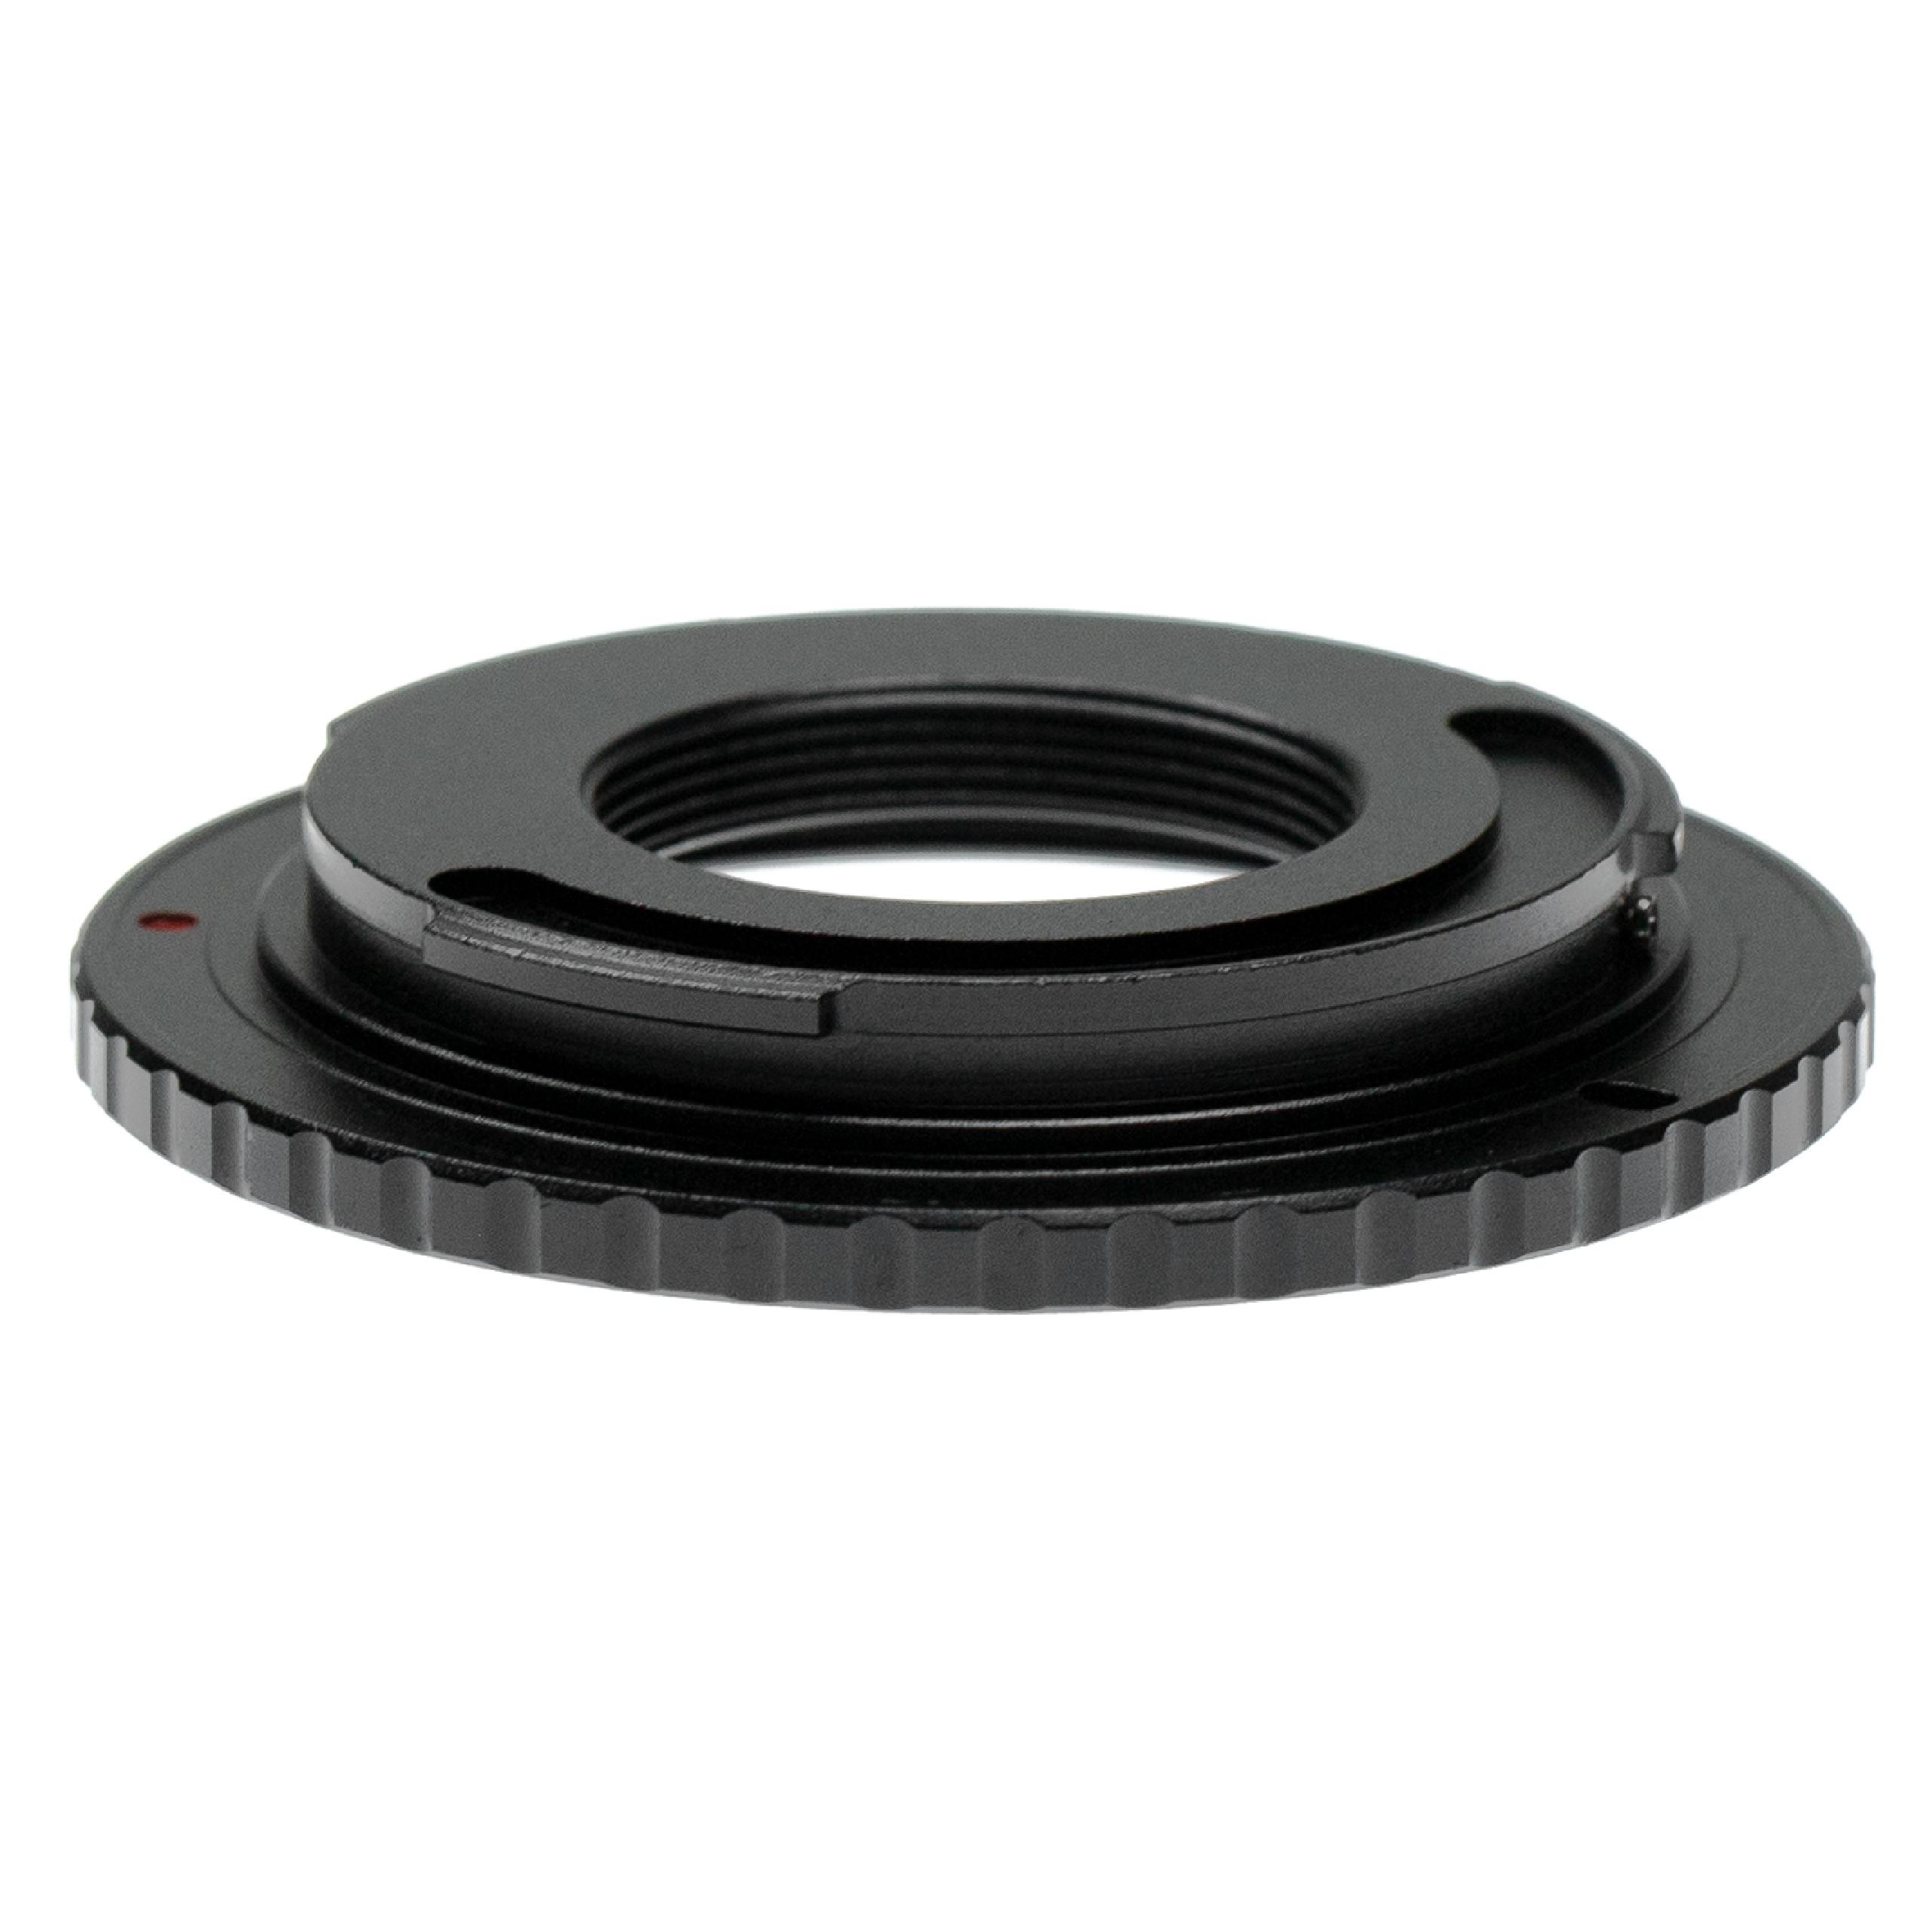 vhbw Adapter Ring for Lenses with M42 Thread Camera, Lens